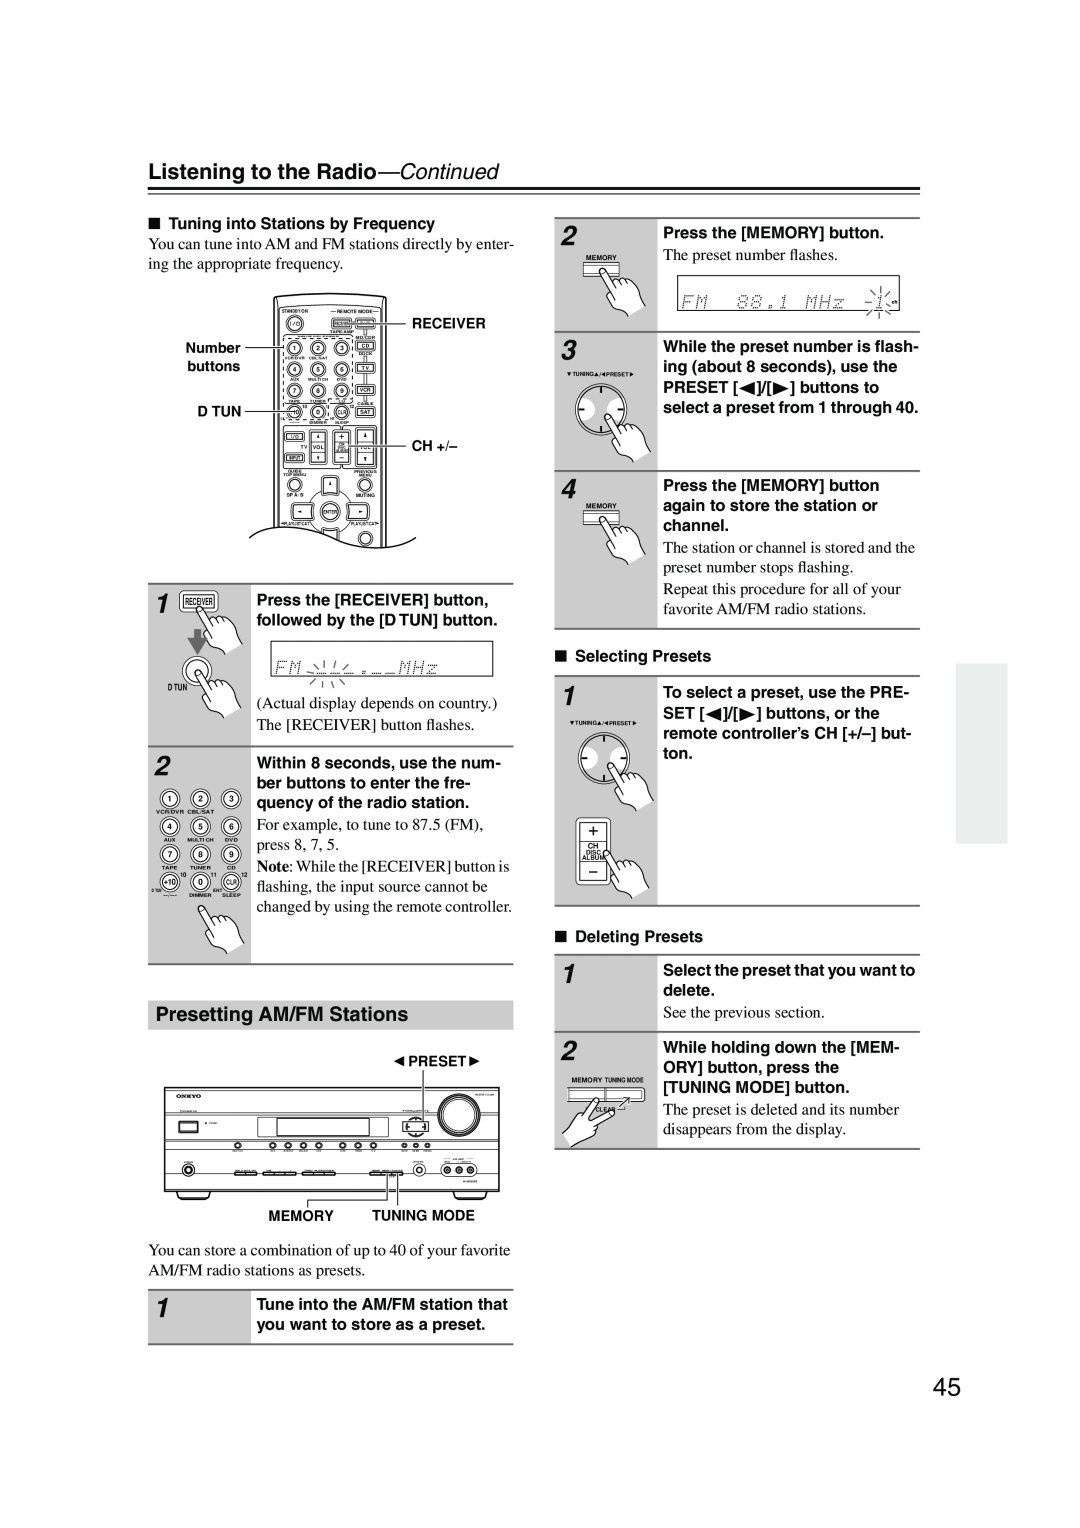 Onkyo HT-SP904 instruction manual Listening to the Radio—Continued, Presetting AM/FM Stations, The preset number ﬂashes 